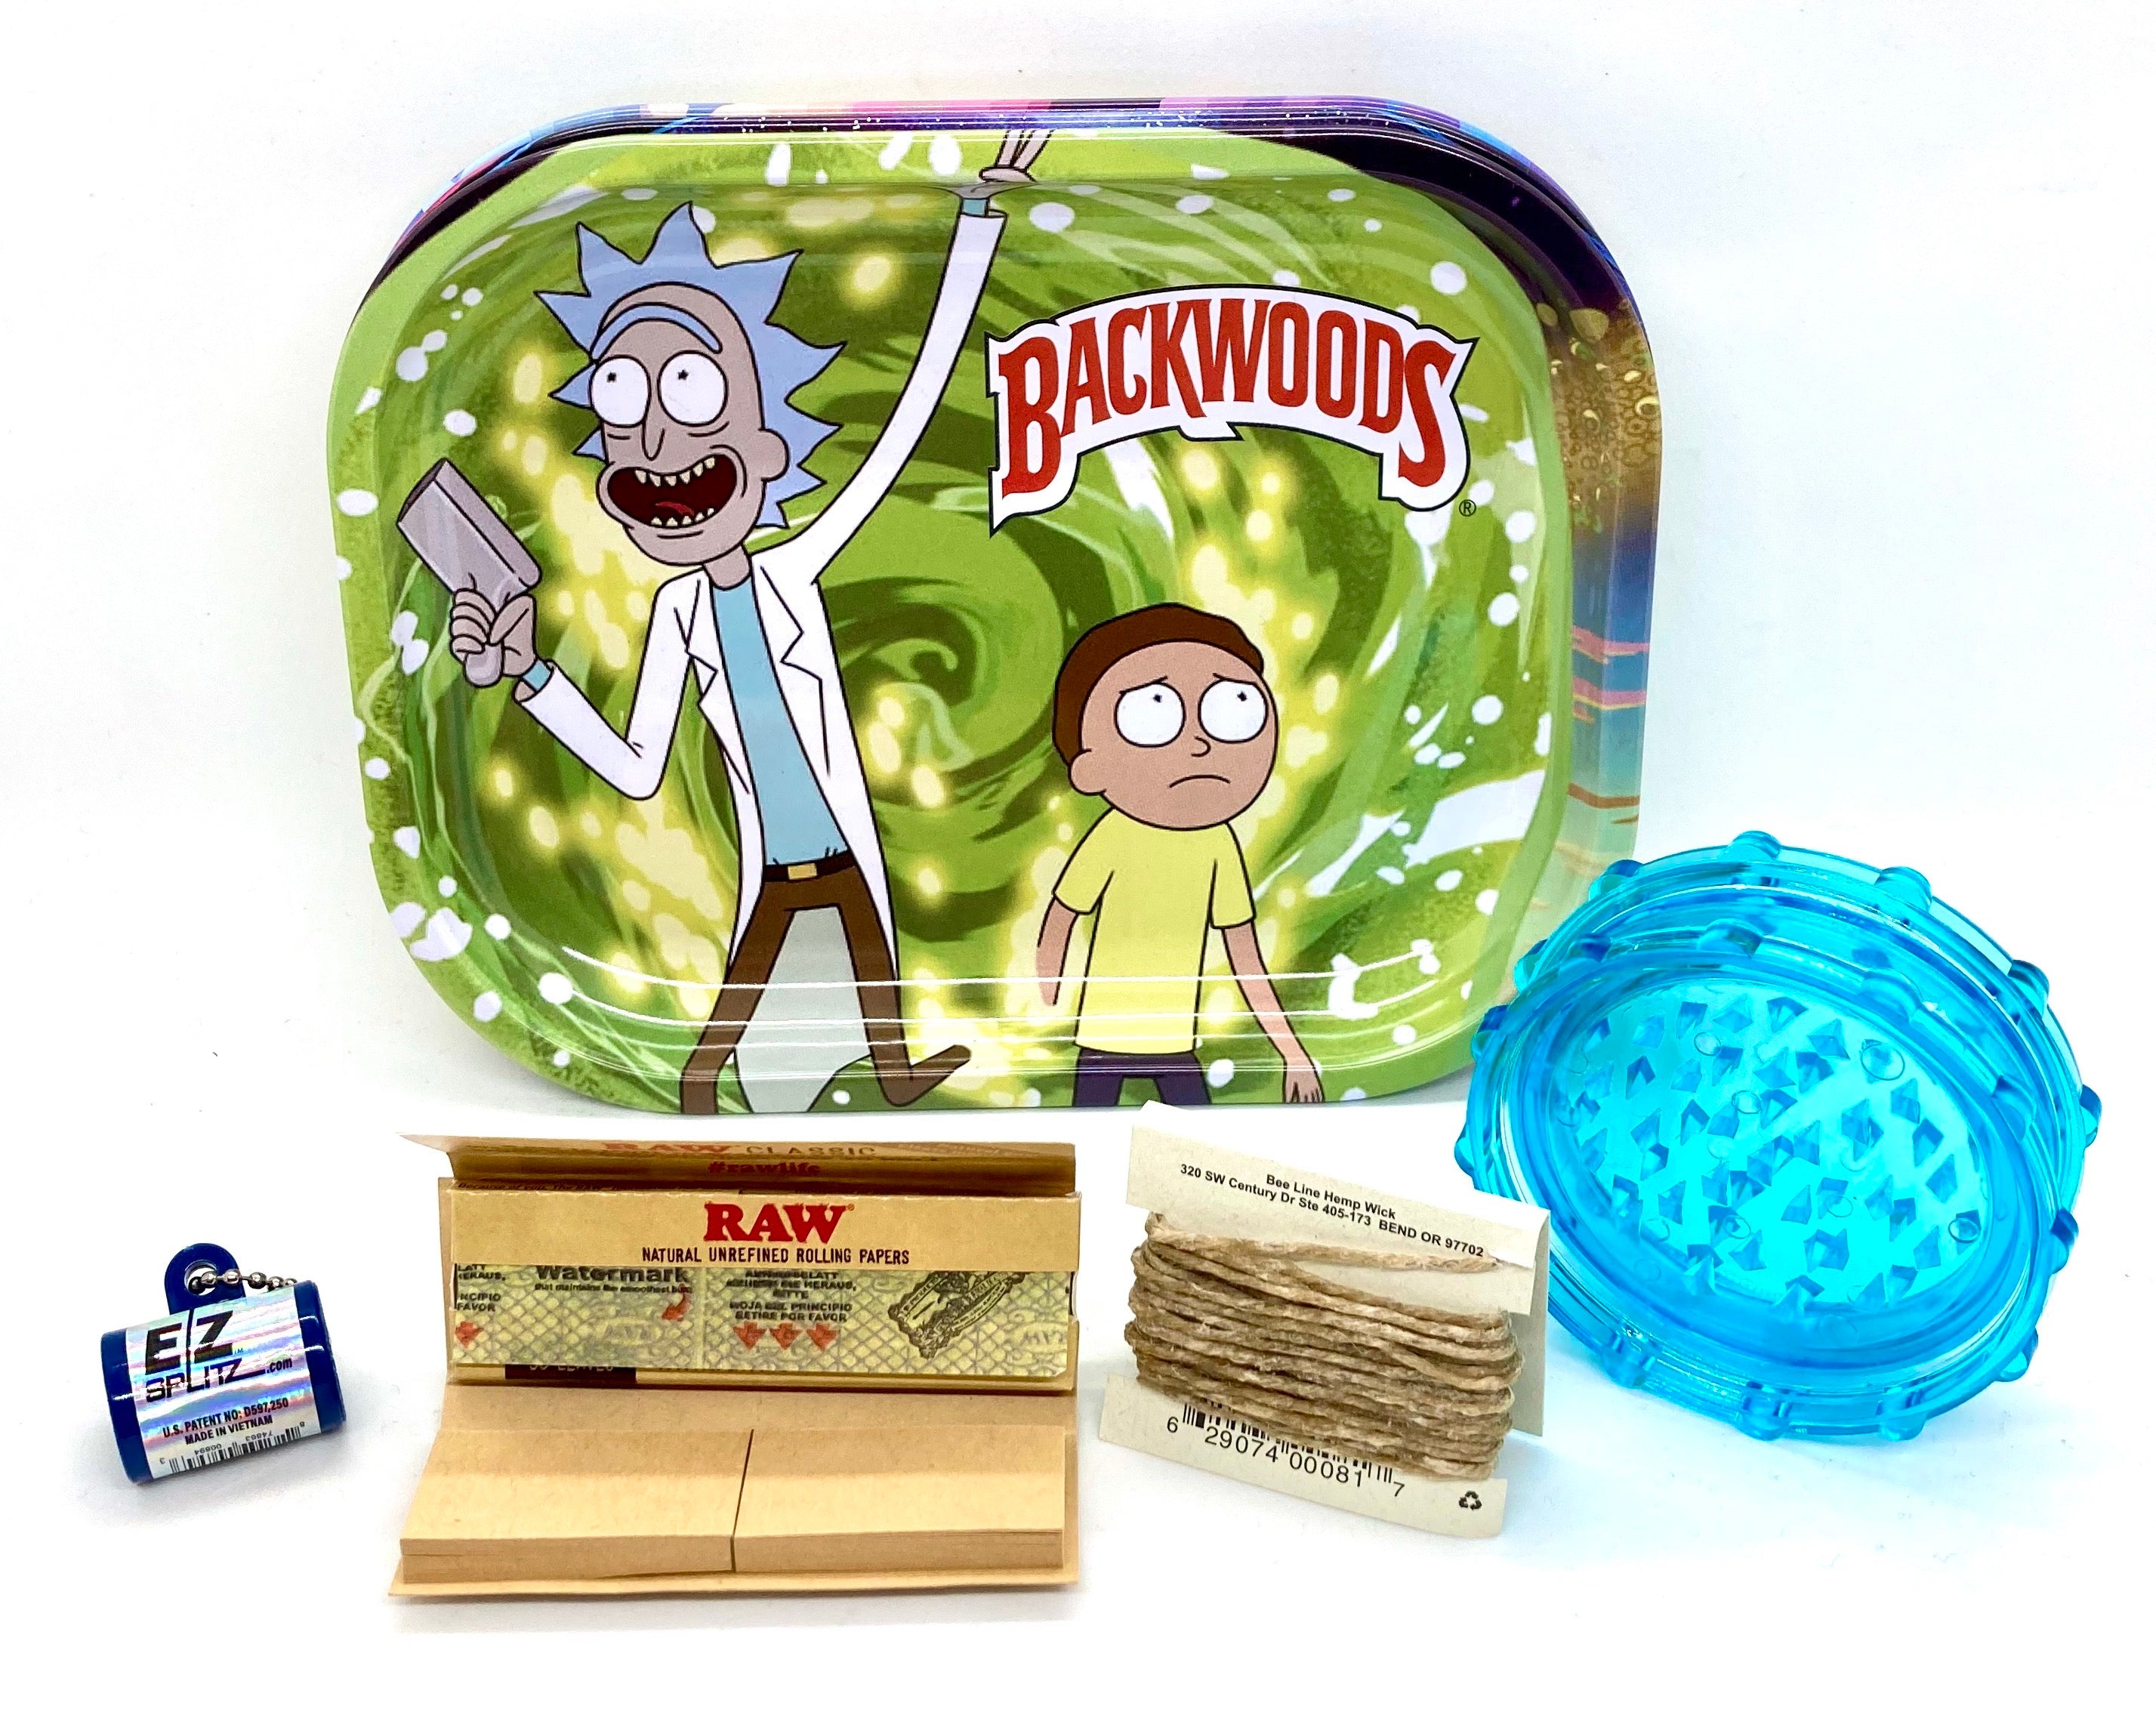 Rolling Tray Voyage Rick & Morty - 420Shop